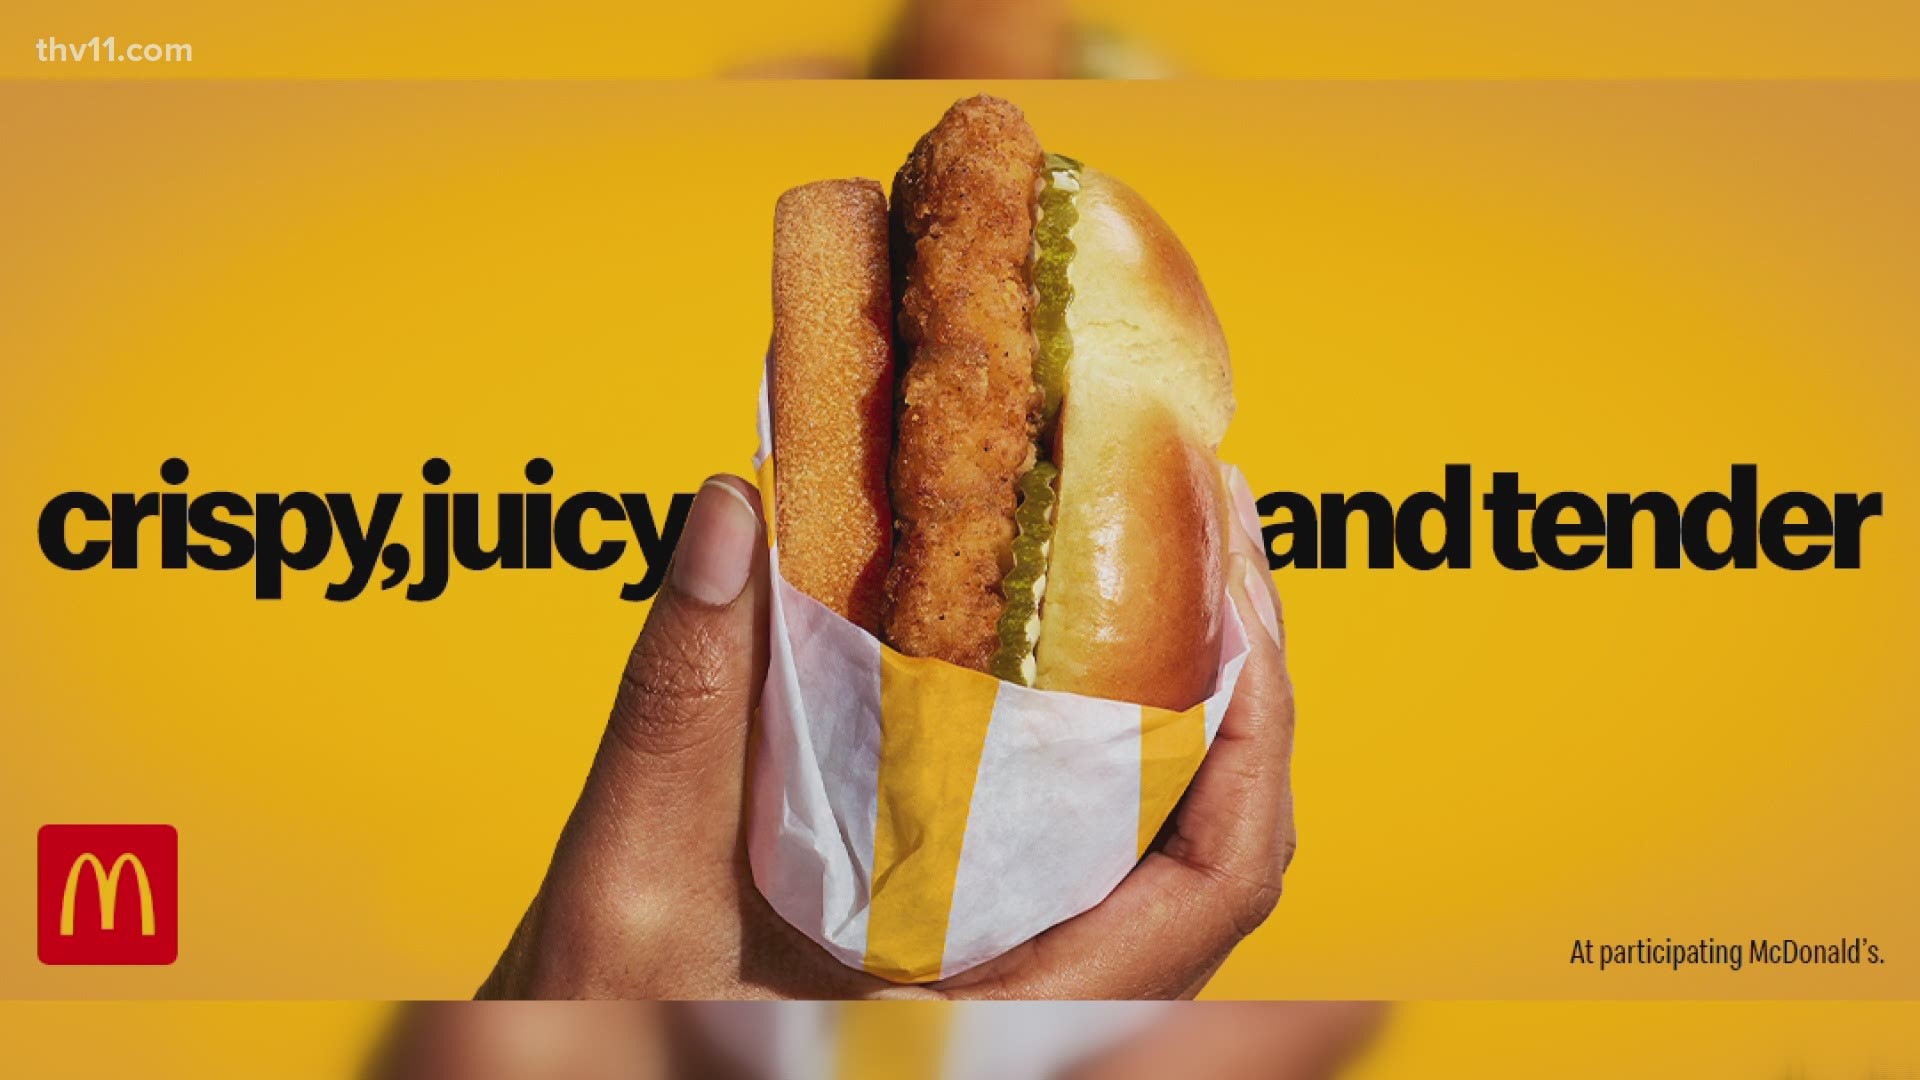 Ashley King and Corallys Ortiz try the new Crispy Chicken Sandwich from McDonald's.